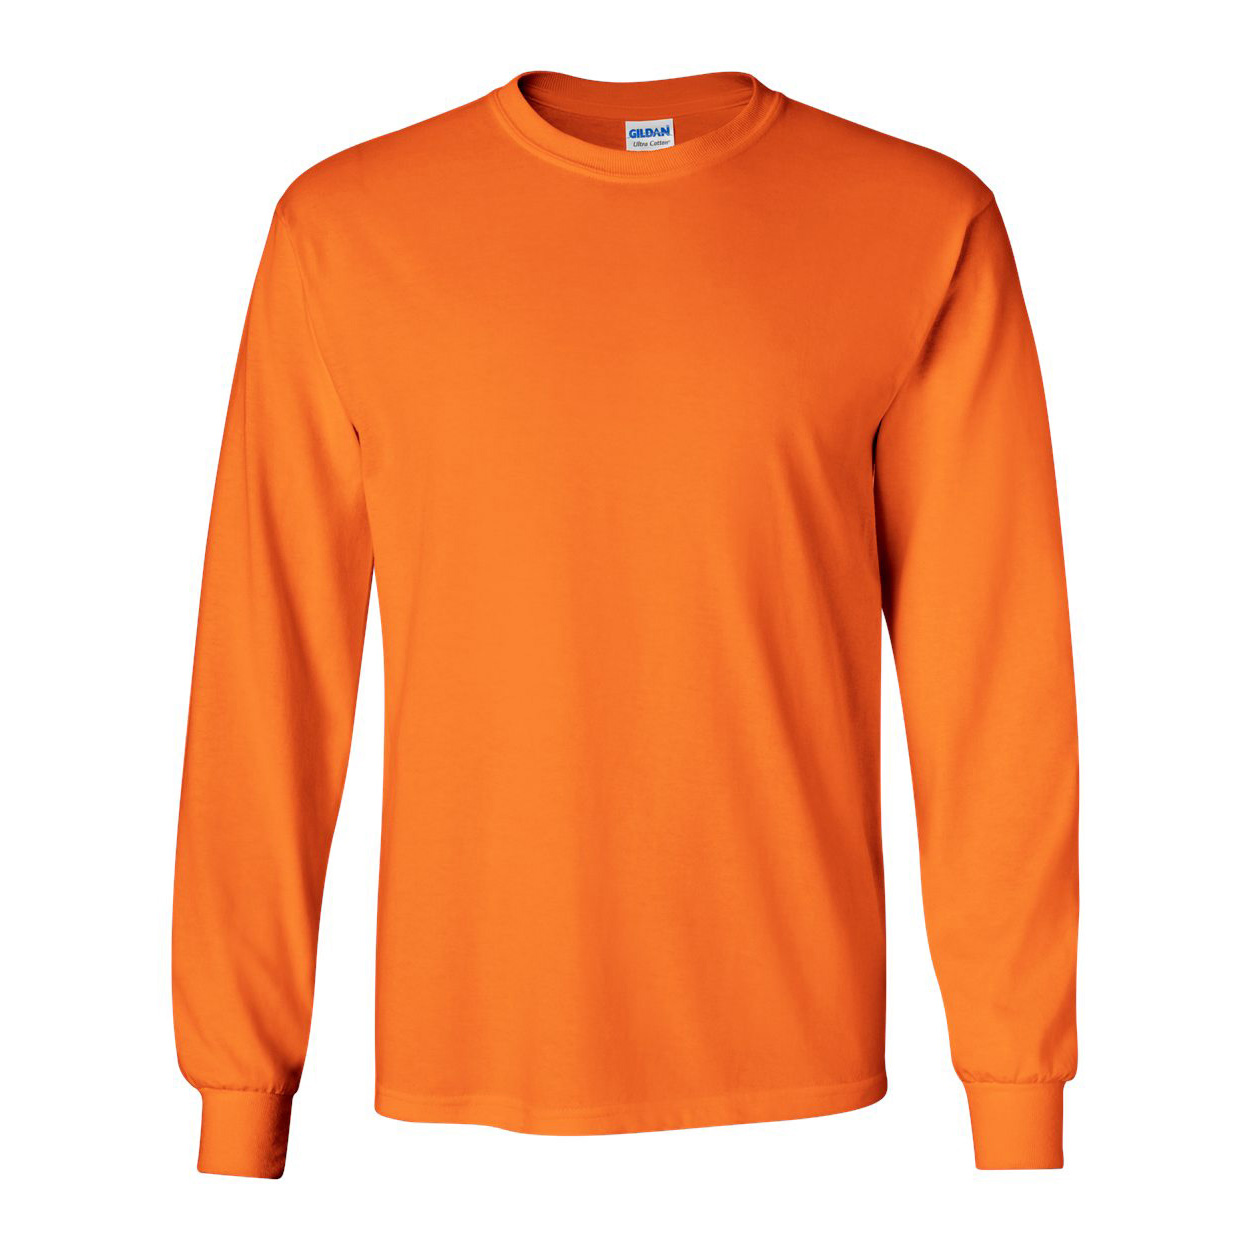 LONG SLEEVE T-SHIRT - Best Value - North American Safety